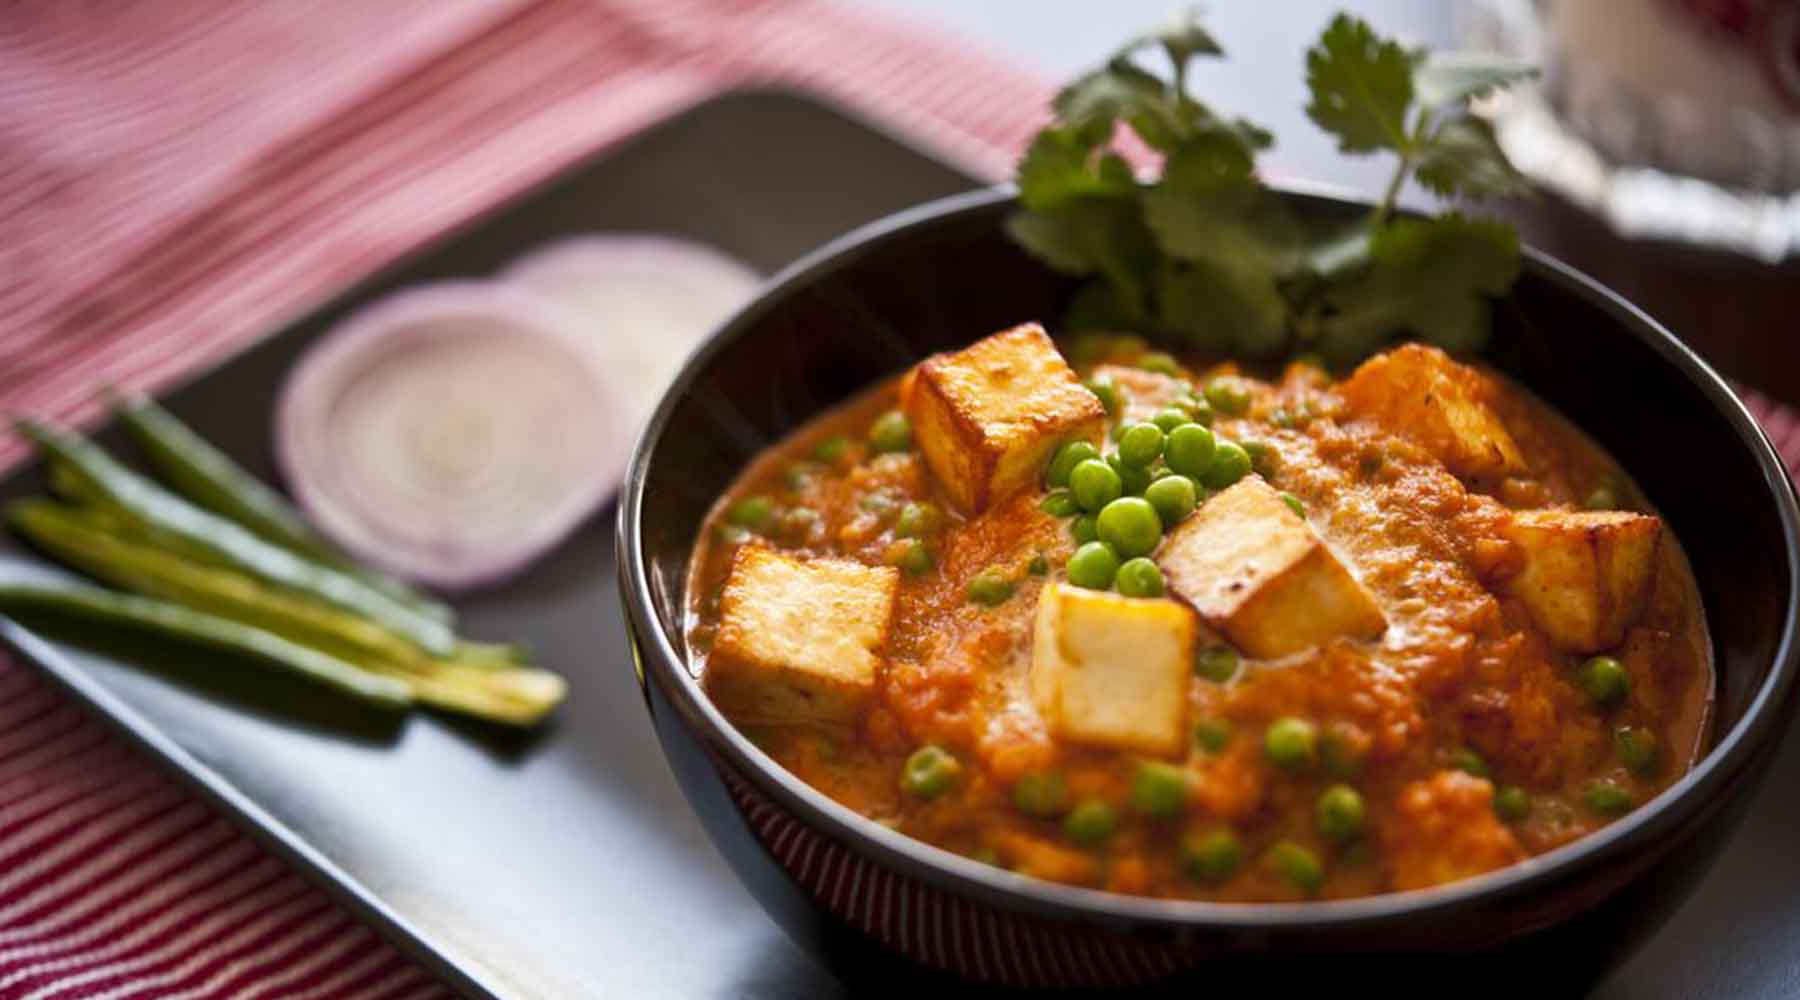 Curry dish with peas and potatoes